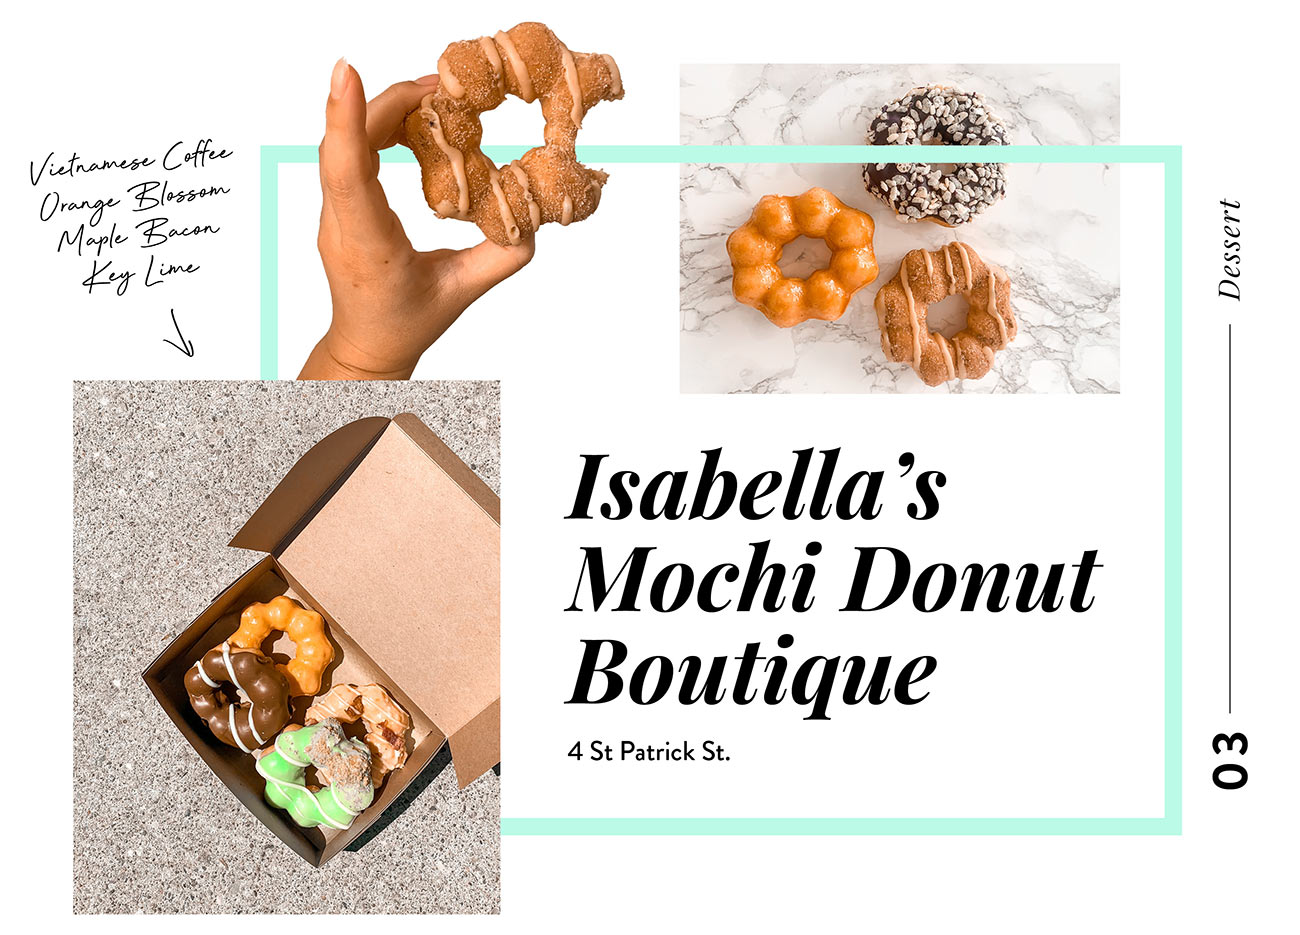 Places to eat in Toronto - Toronto restaurants - Isabella's Mochi Donut Boutique